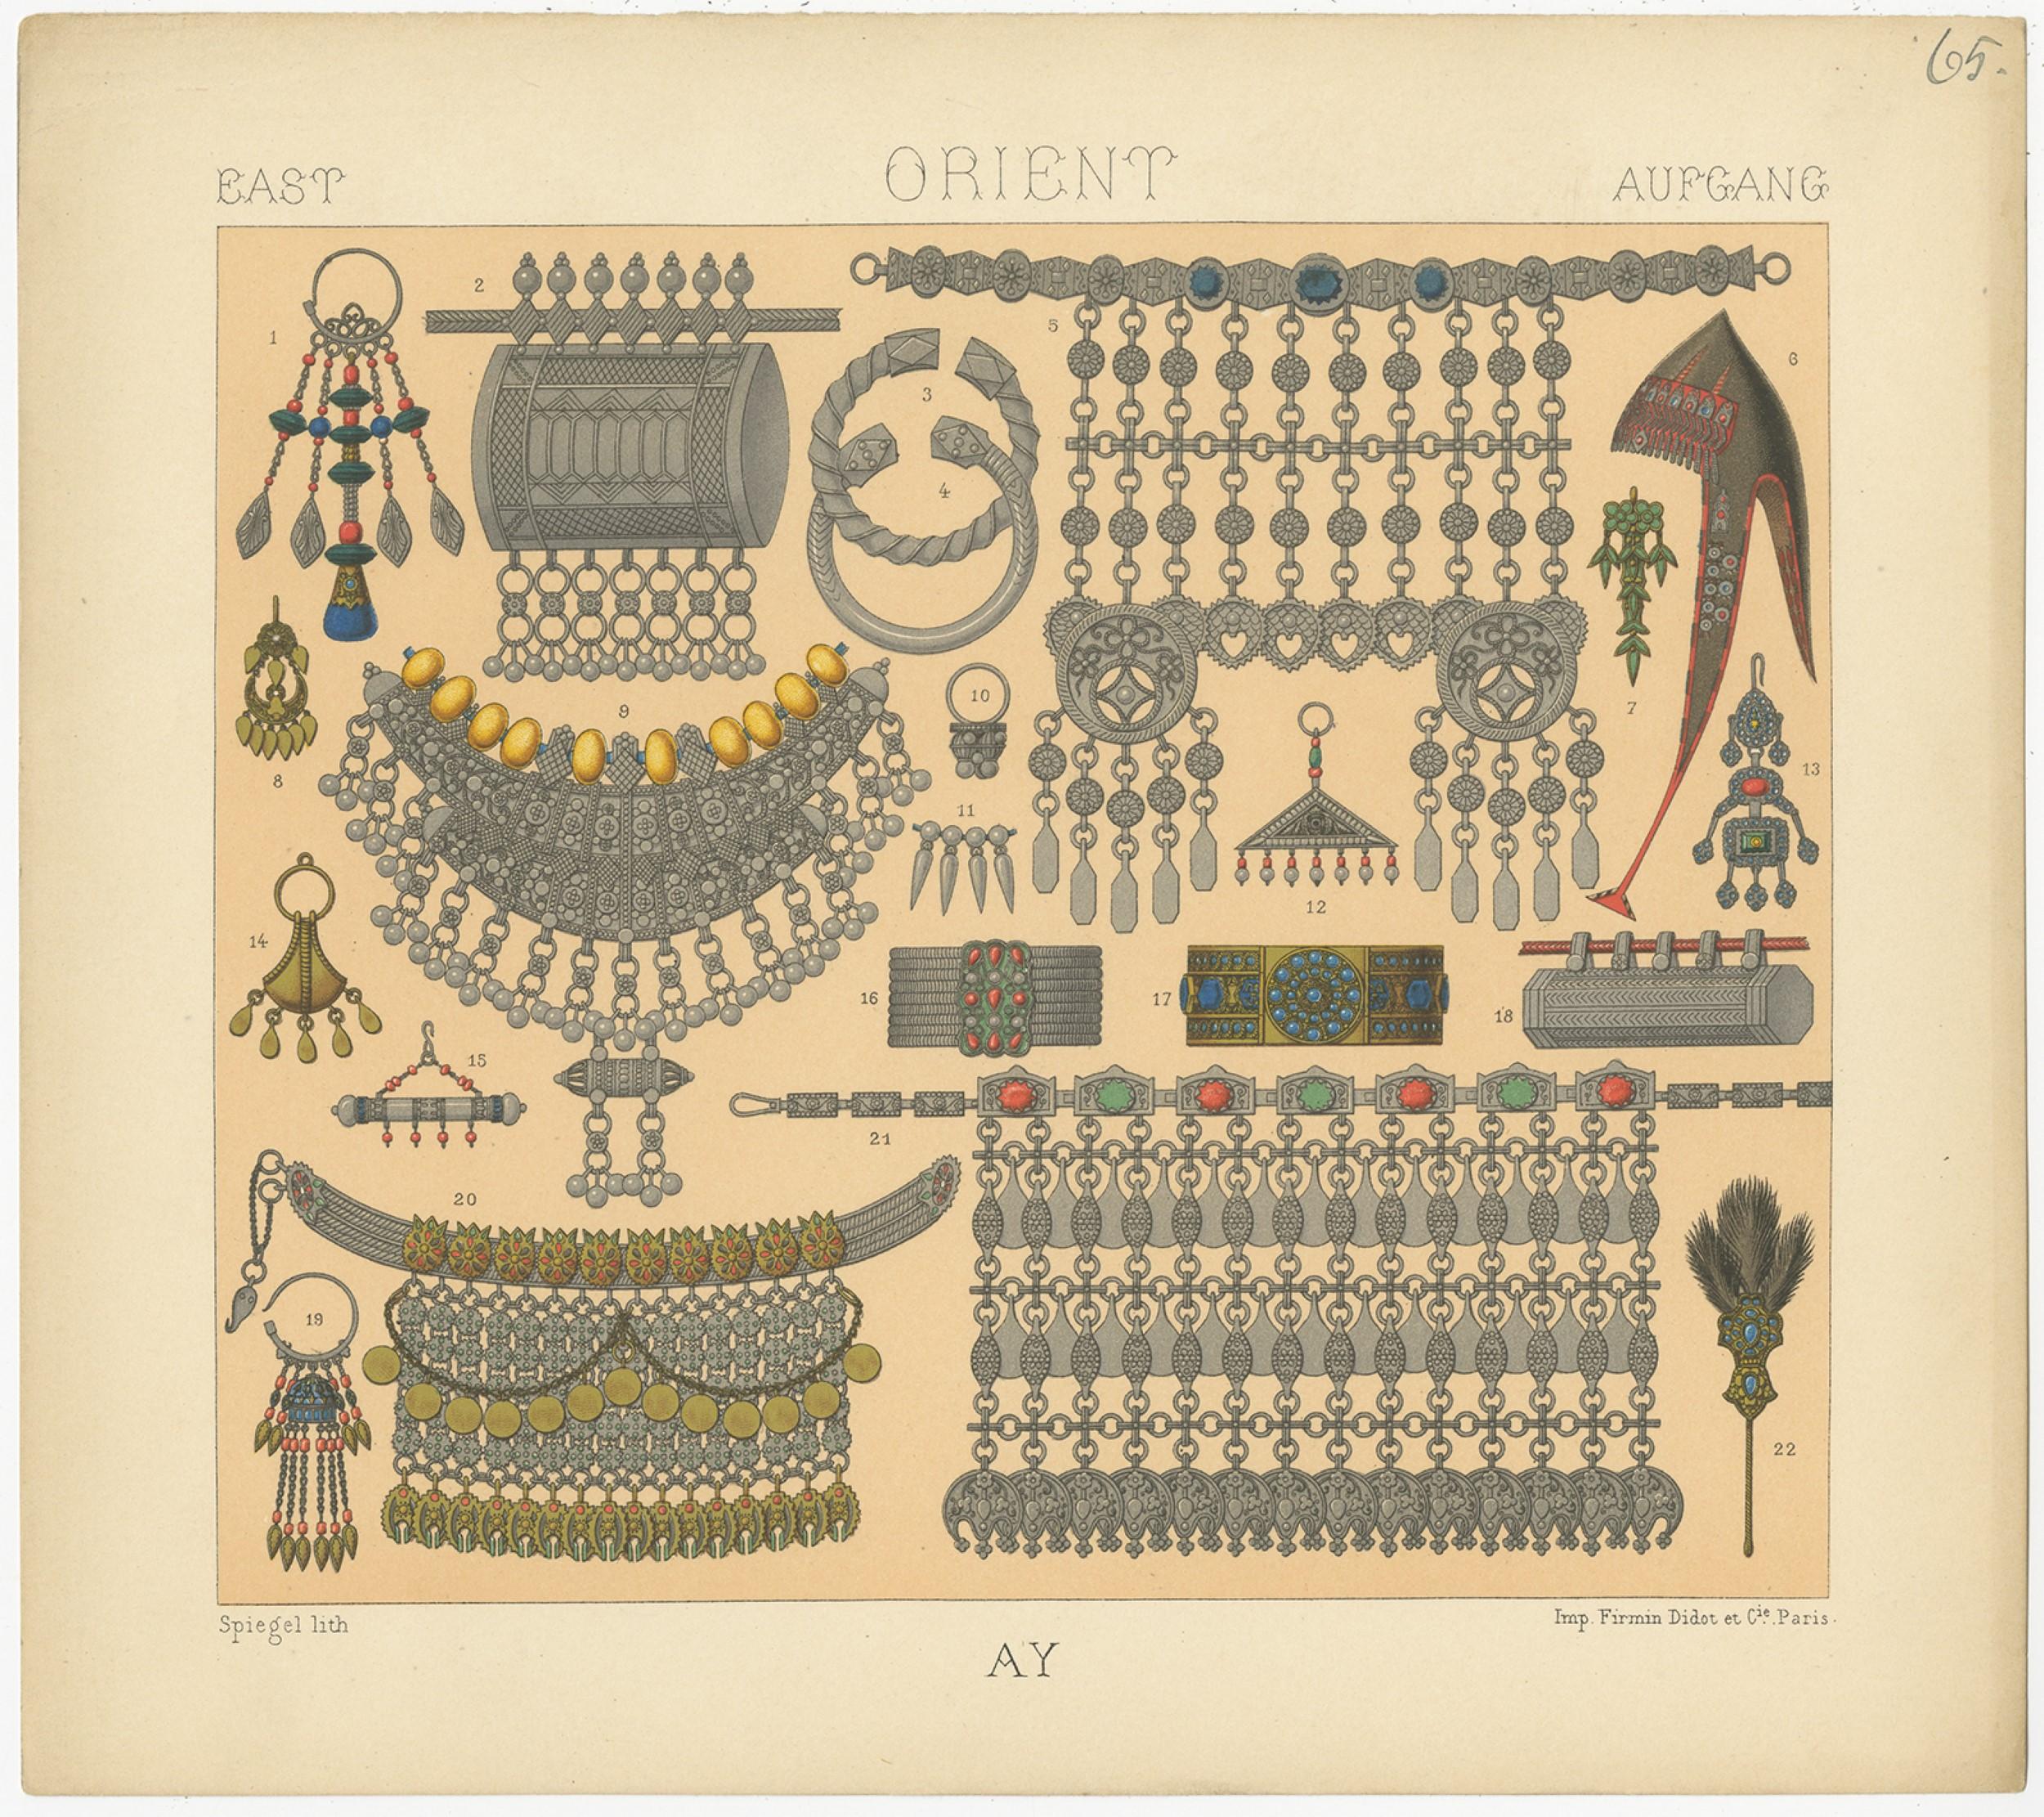 Antique print titled 'East - Orient - Aufgang'. Chromolithograph of Eastern Jewelry. This print originates from 'Le Costume Historique' by M.A. Racinet. Published, circa 1880.